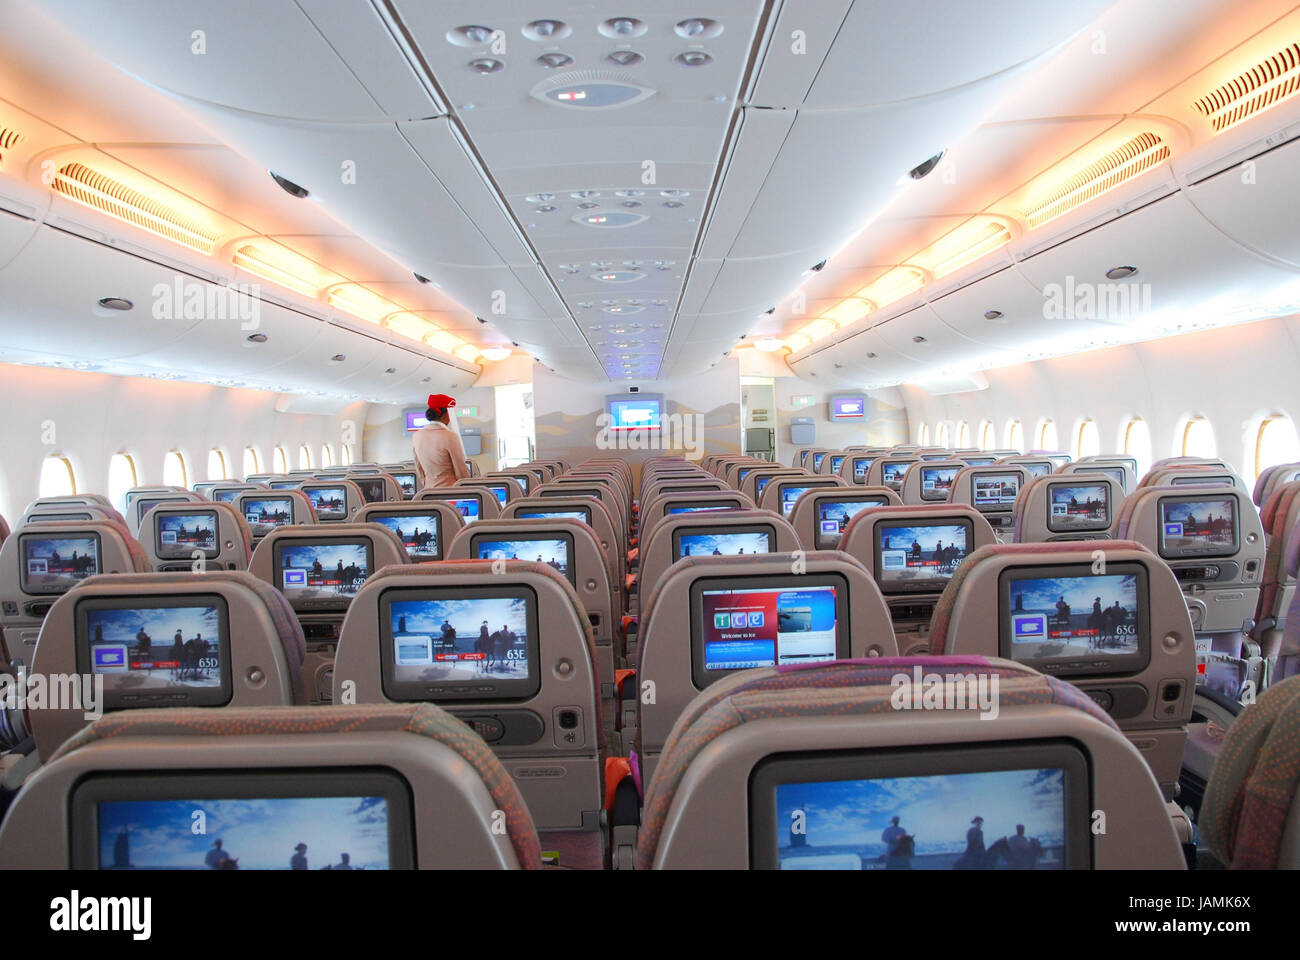 Civil aviation,air liner,airbus A380,cabin,rows, Stock Photo